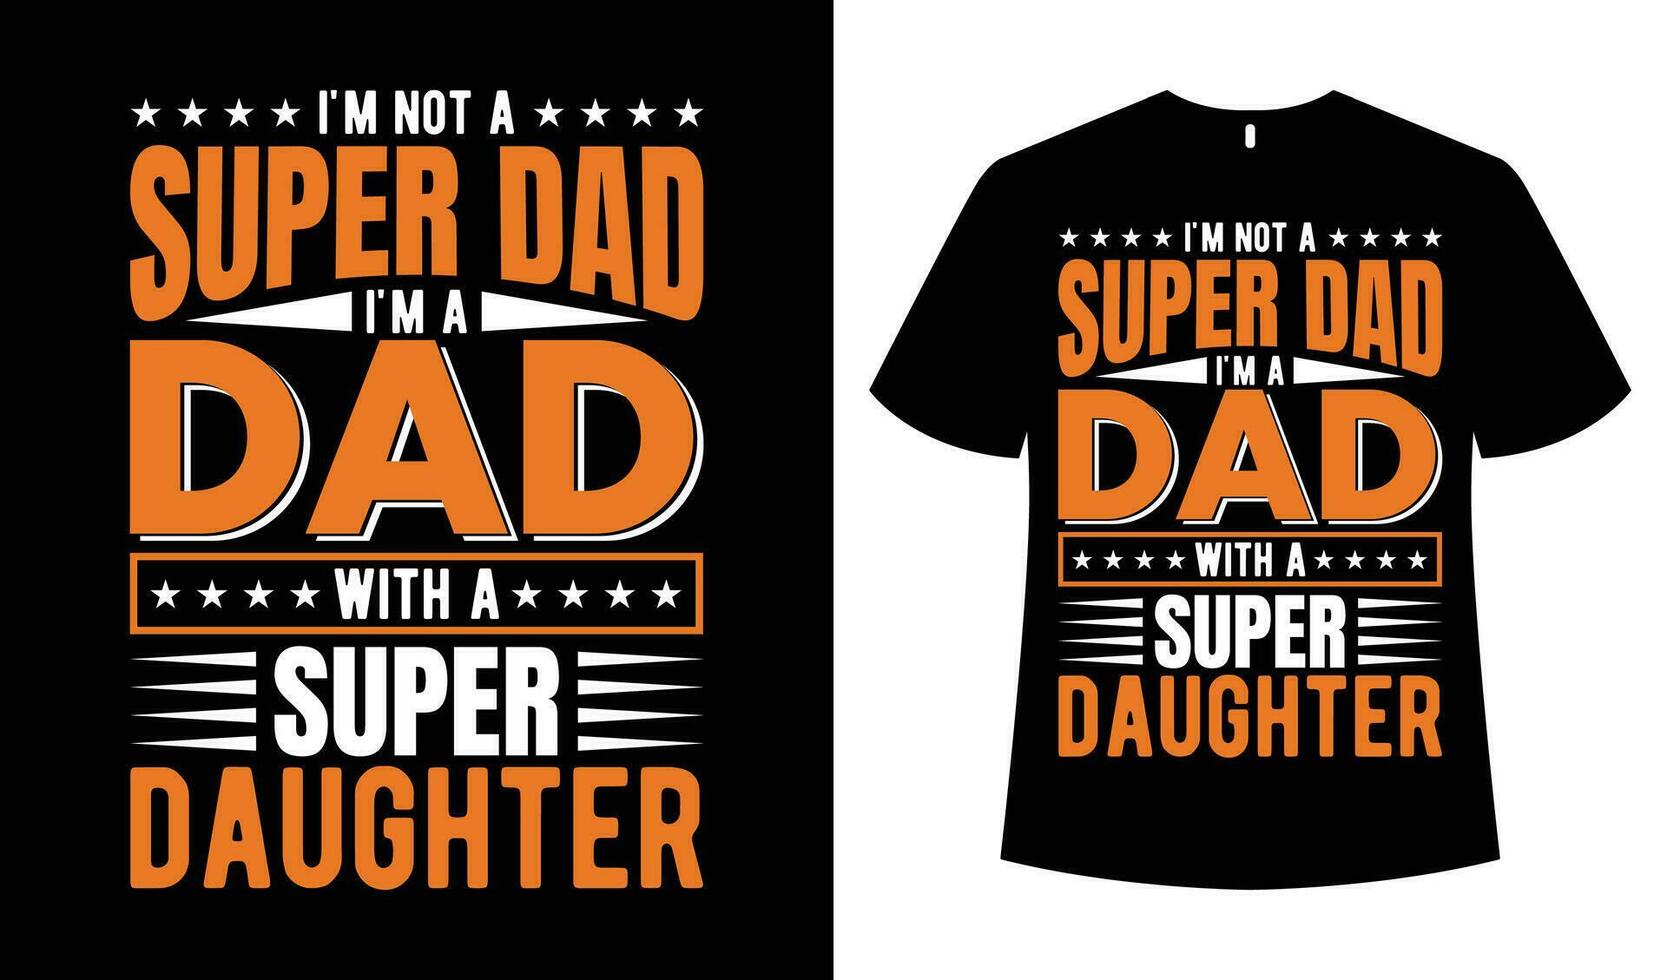 fathers day t shirt design, dad t-shirt, Father's Day T-shirts Design vector file.